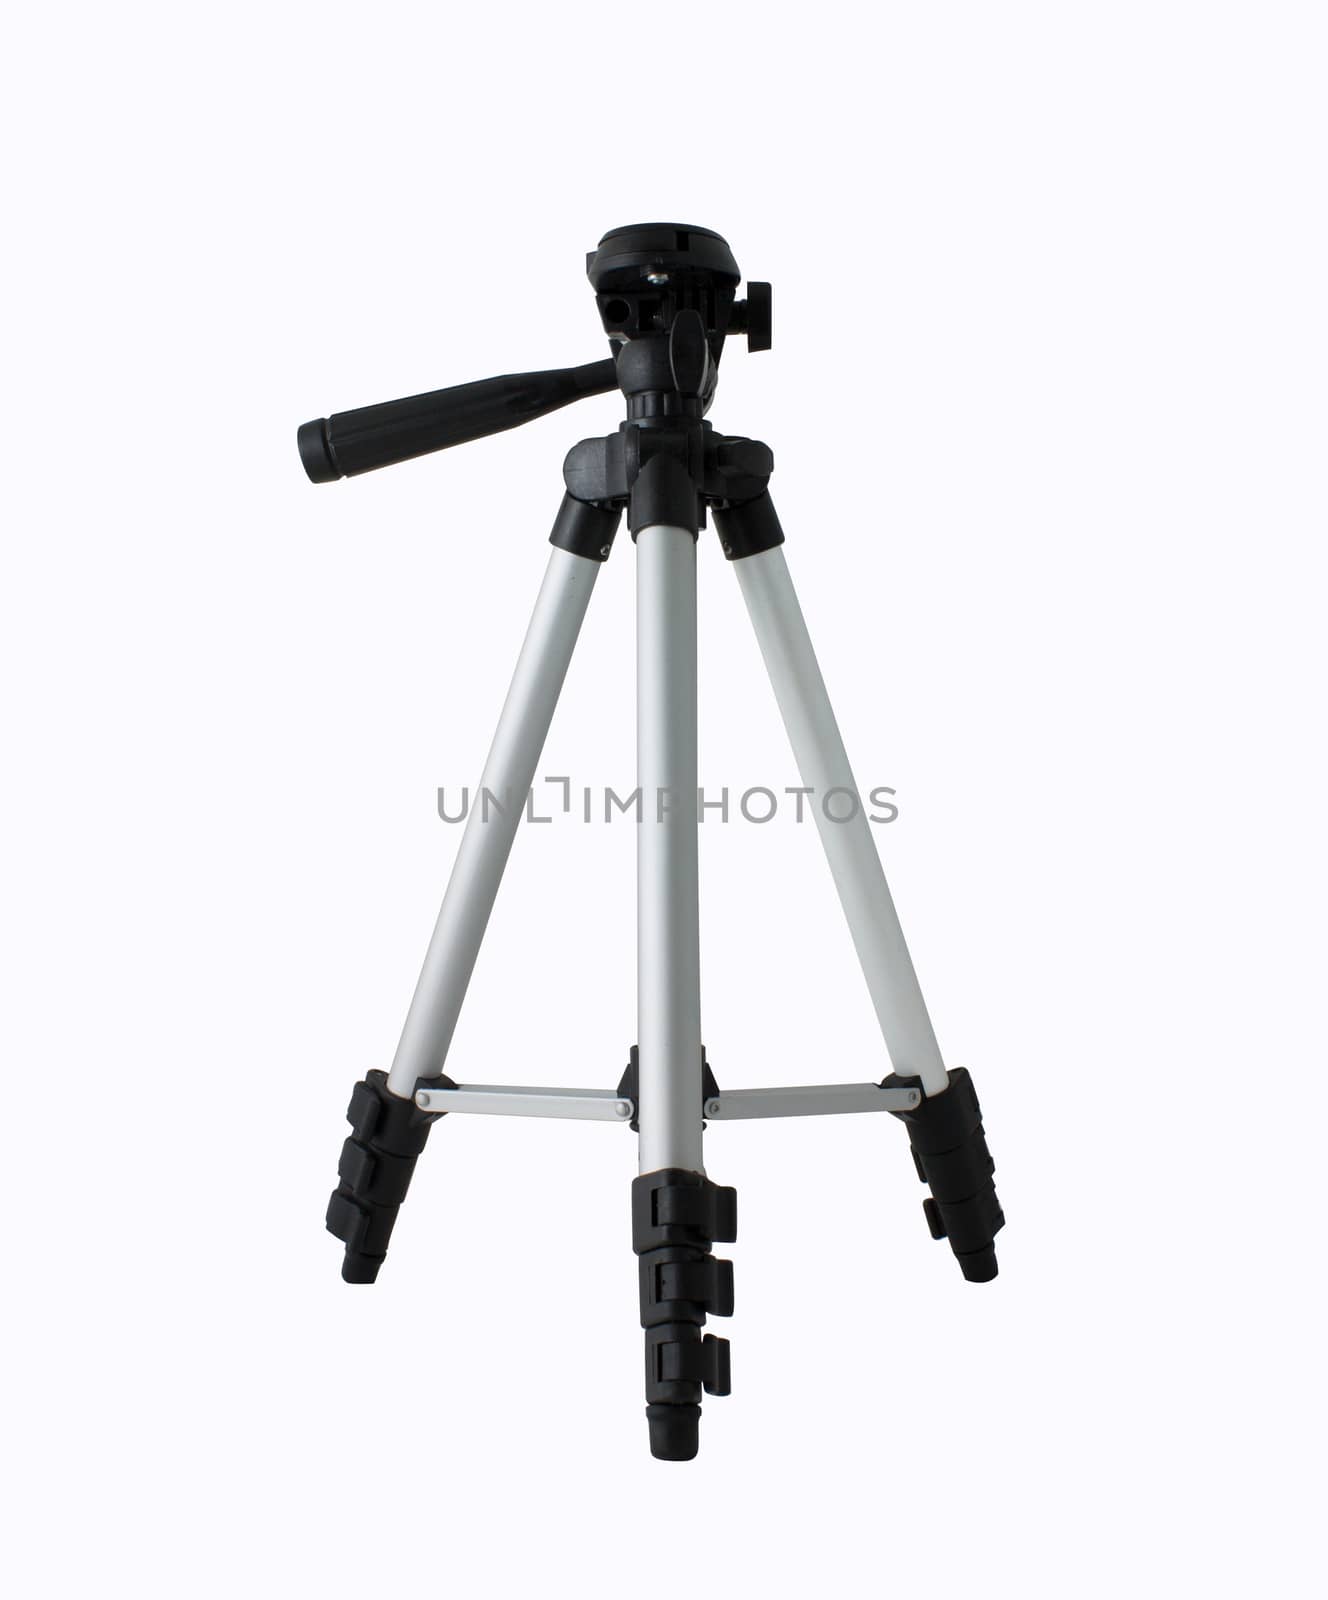 Small tripod camera isolated on white